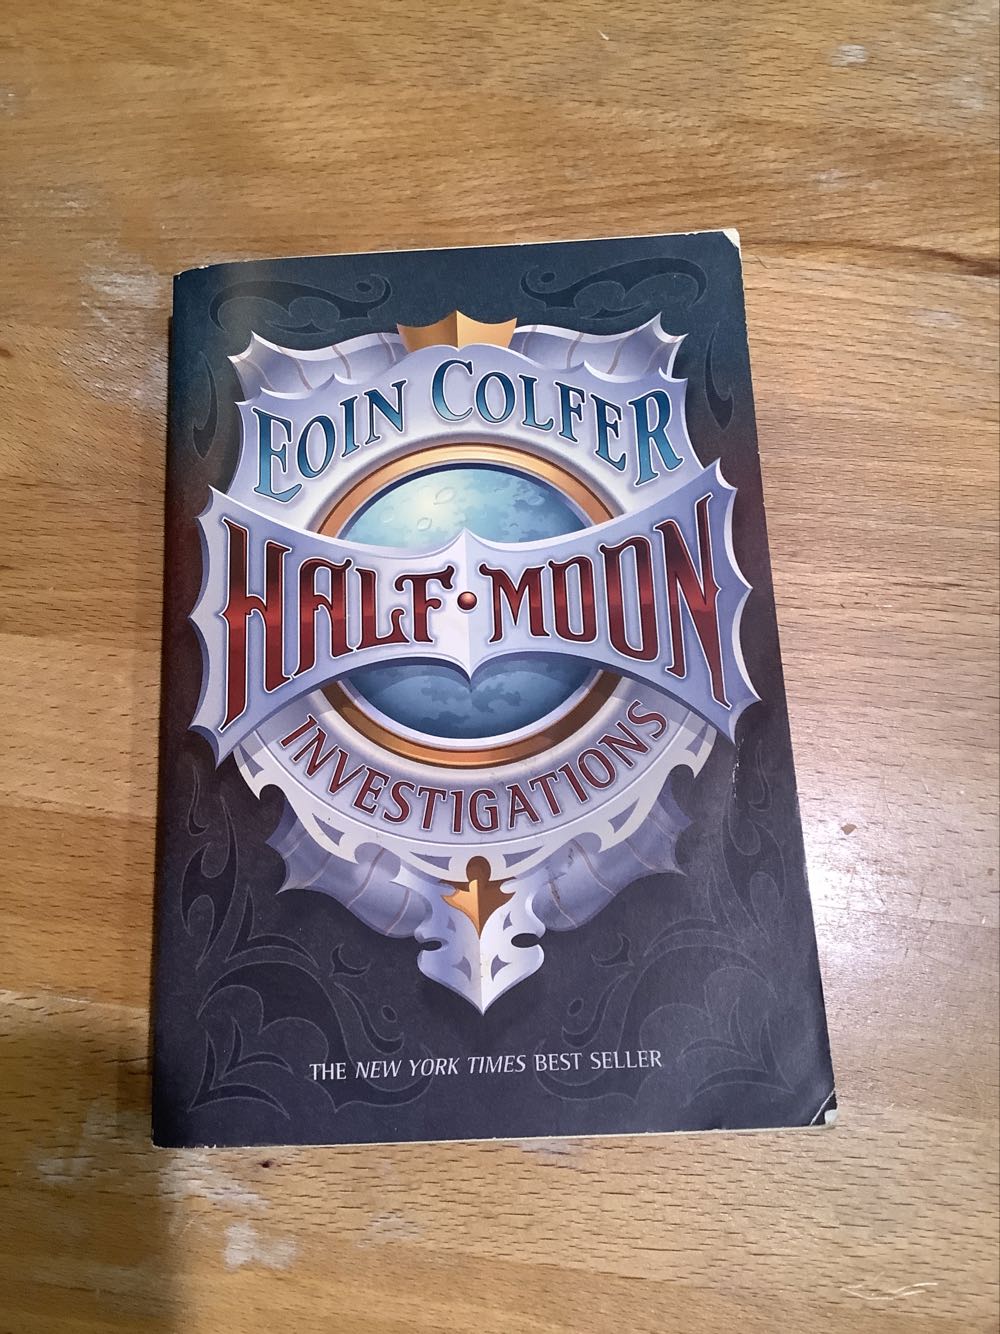 Half-Moon Investigations - Eoin Colfer (Miramax - Trade Paperback) book collectible [Barcode 9781423105091] - Main Image 2